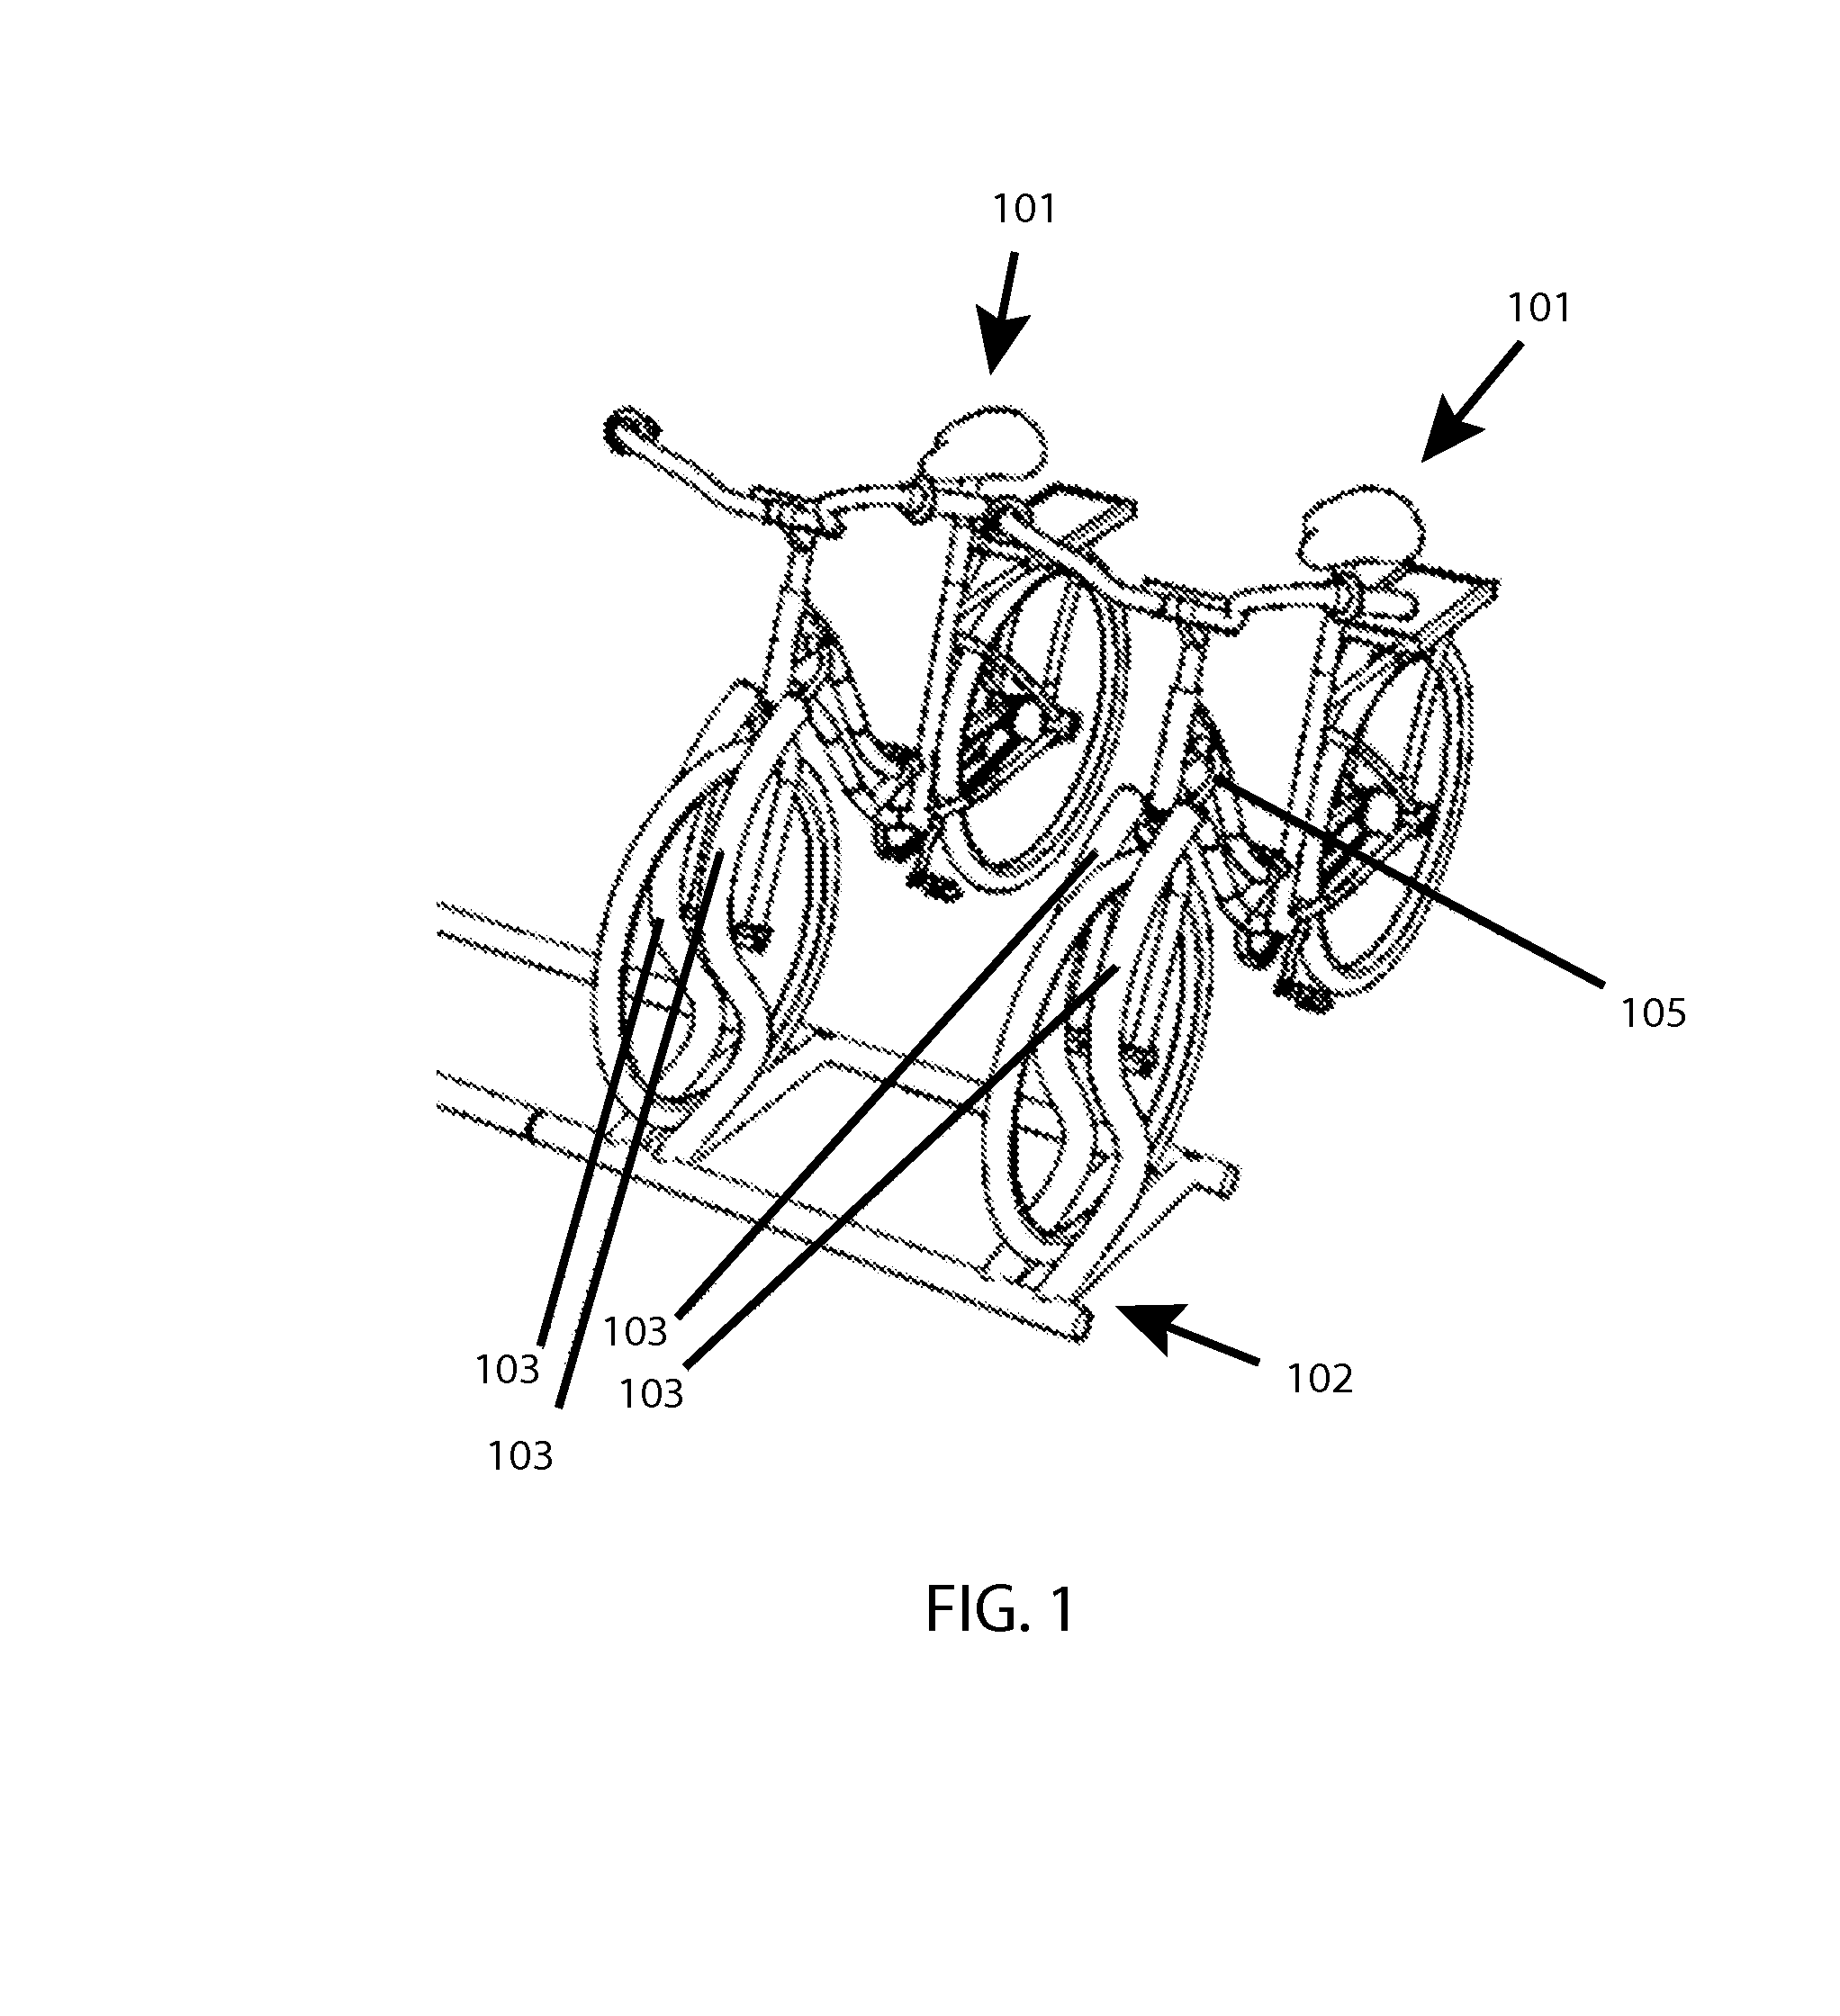 System and method for bicycle sharing and rental